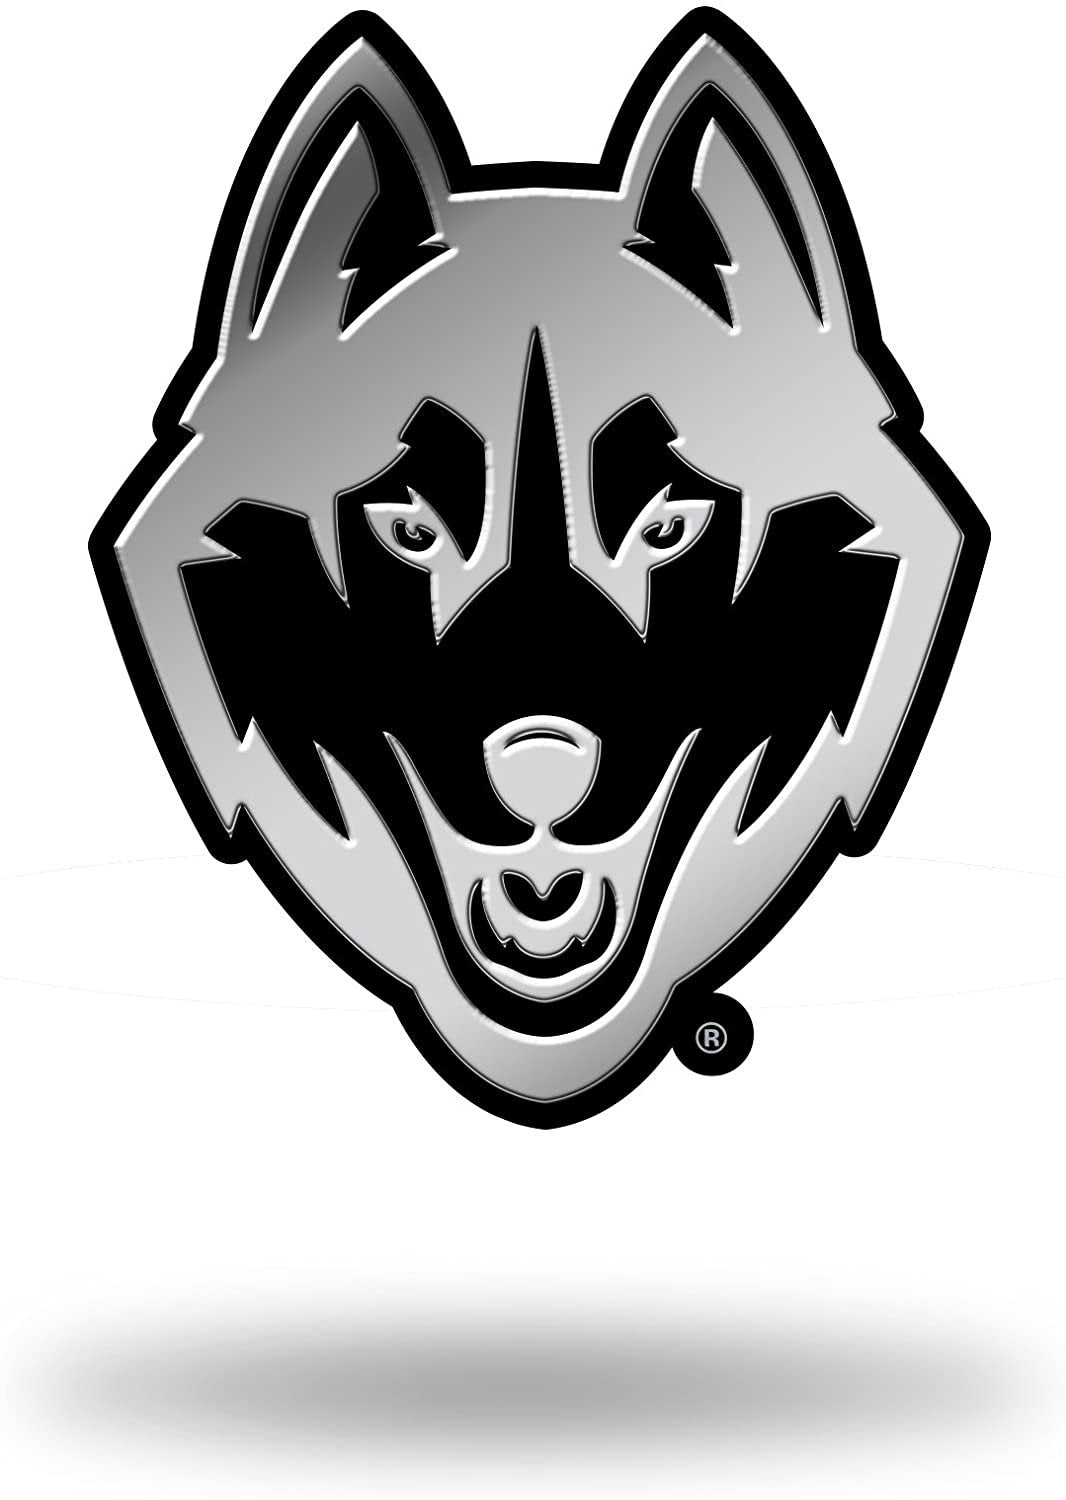 University of Connecticut Huskies Uconn Auto Emblem, Silver Chrome Color, Raised Molded Plastic, 3.5 Inch, Adhesive Tape Backing